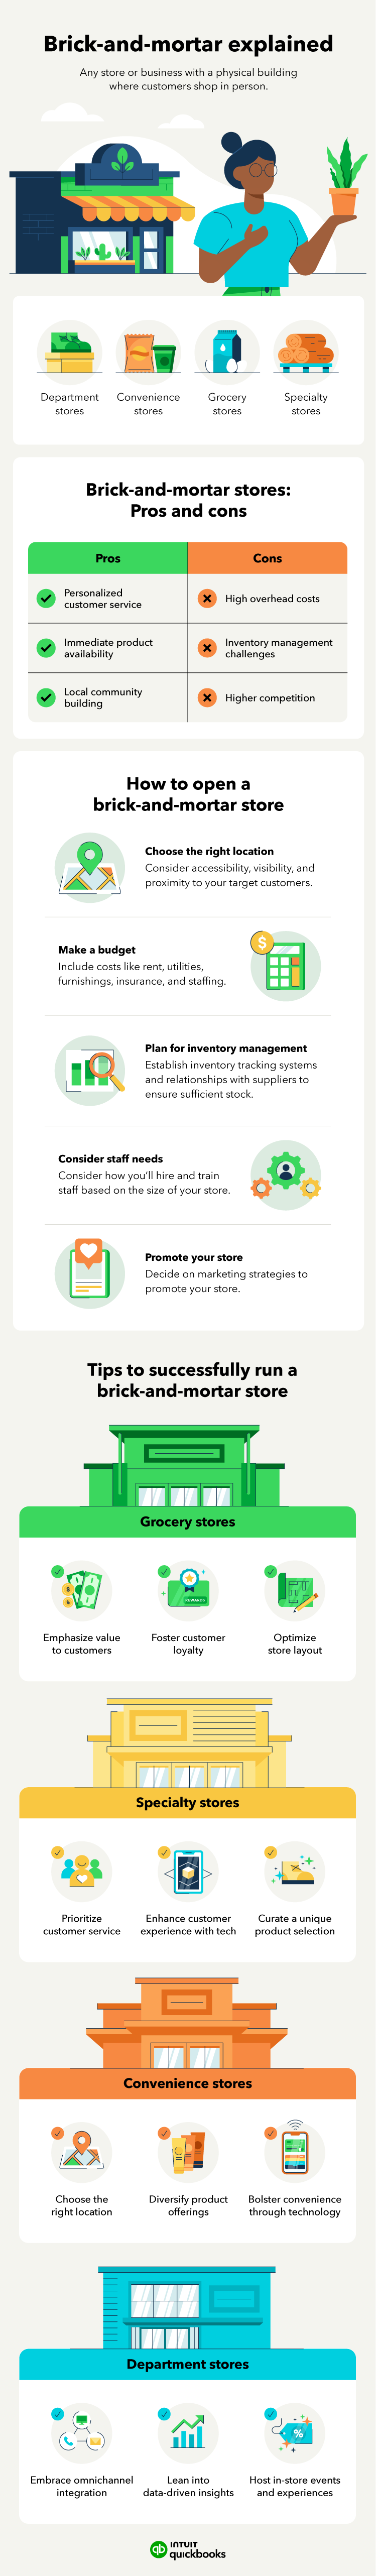 An illustrated infographic displays important concepts small business owners should know about brick-and-mortar stores, including pros and cons, how to open one, and examples of successful brick-and-mortar stores.